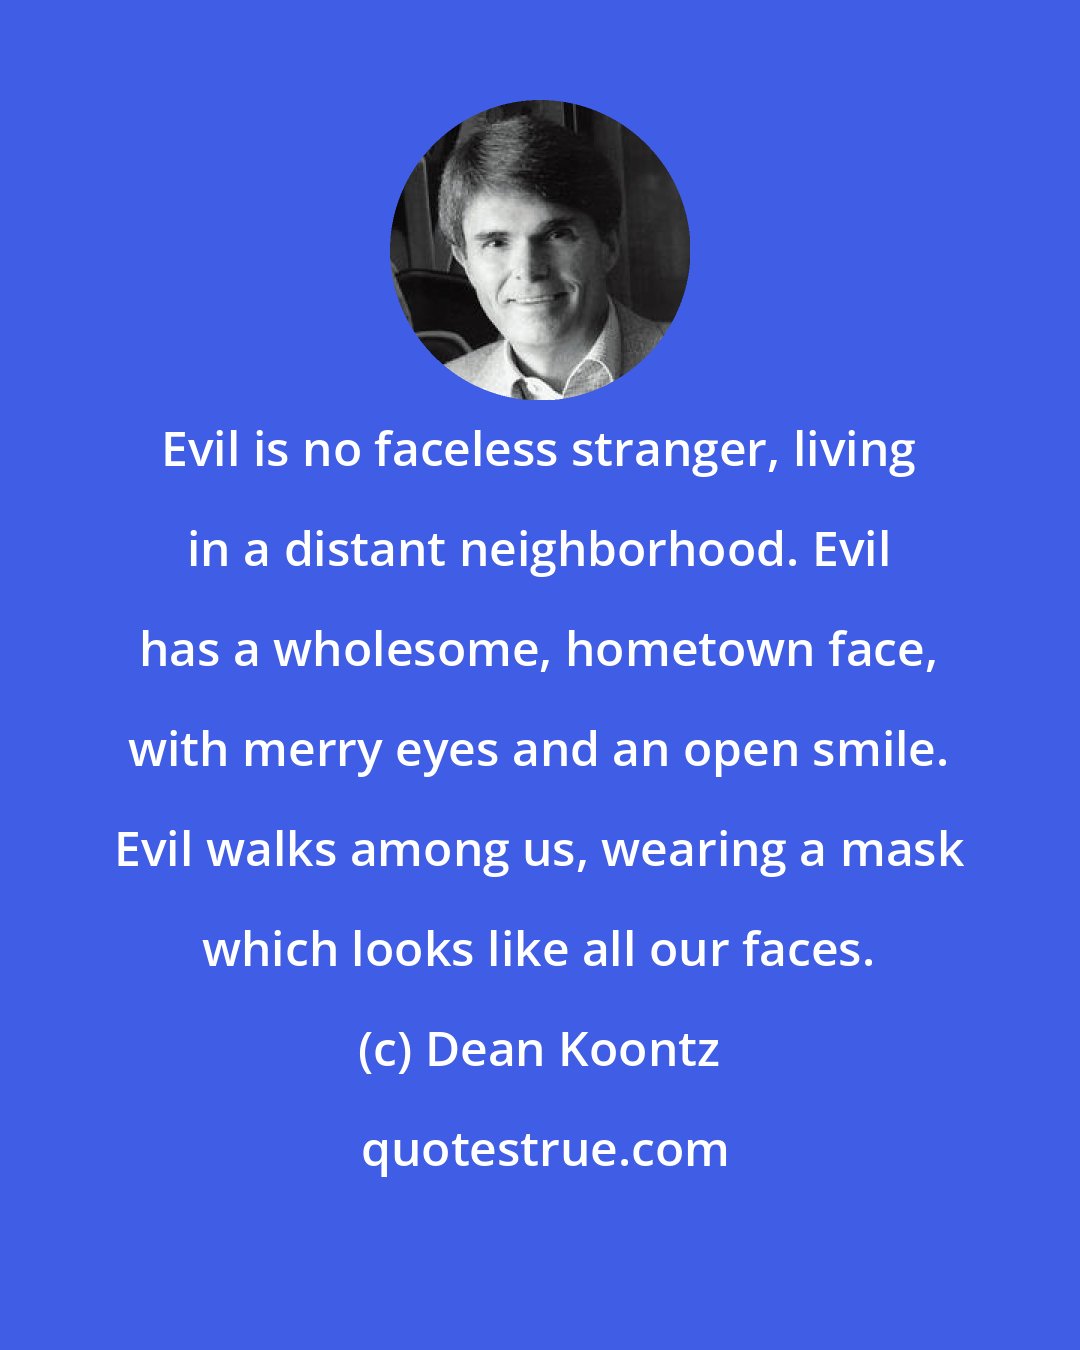 Dean Koontz: Evil is no faceless stranger, living in a distant neighborhood. Evil has a wholesome, hometown face, with merry eyes and an open smile. Evil walks among us, wearing a mask which looks like all our faces.